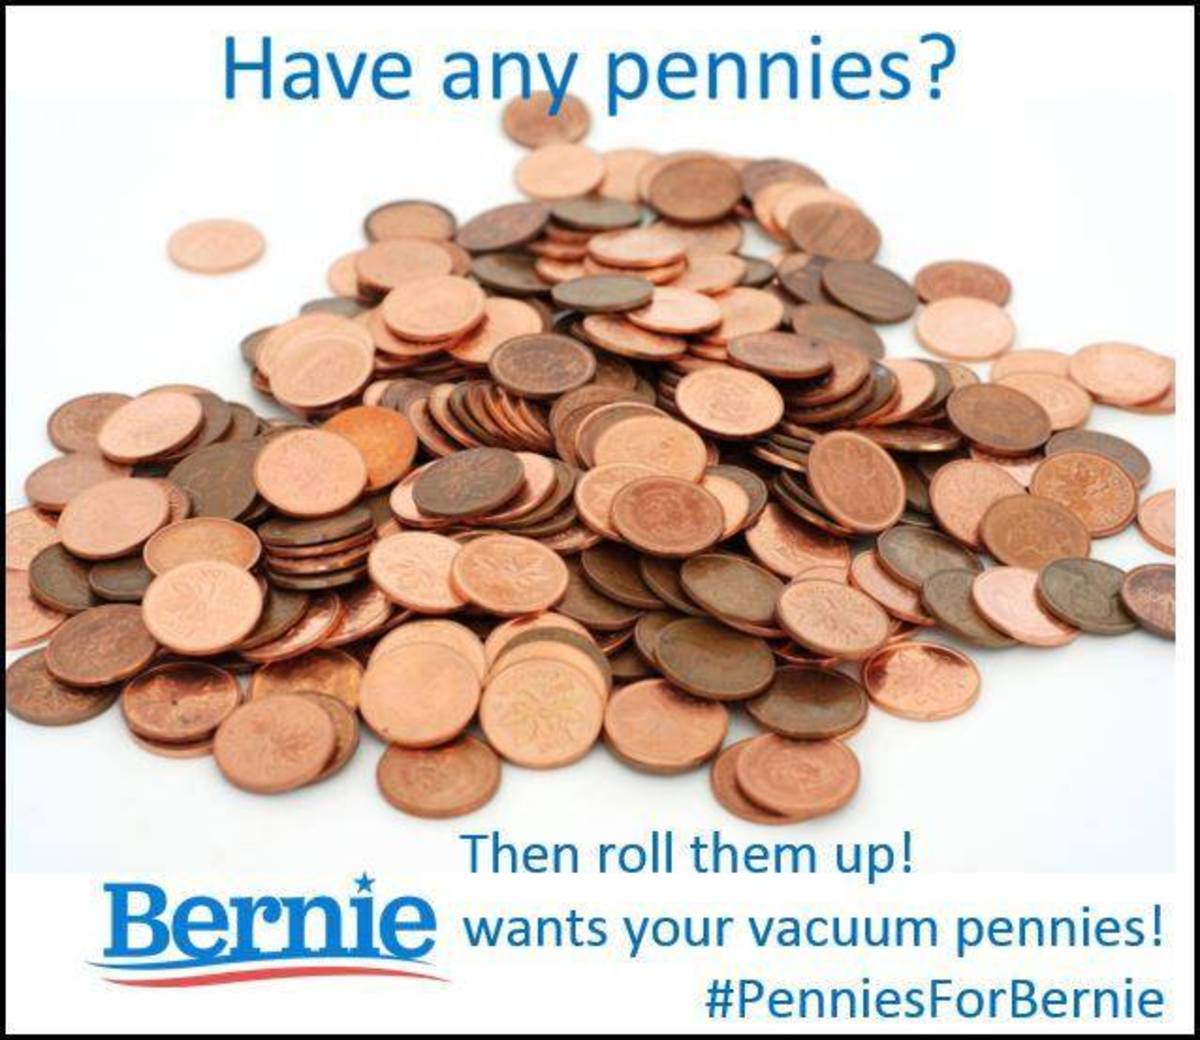 Use your spare pennies to help Bernie win!